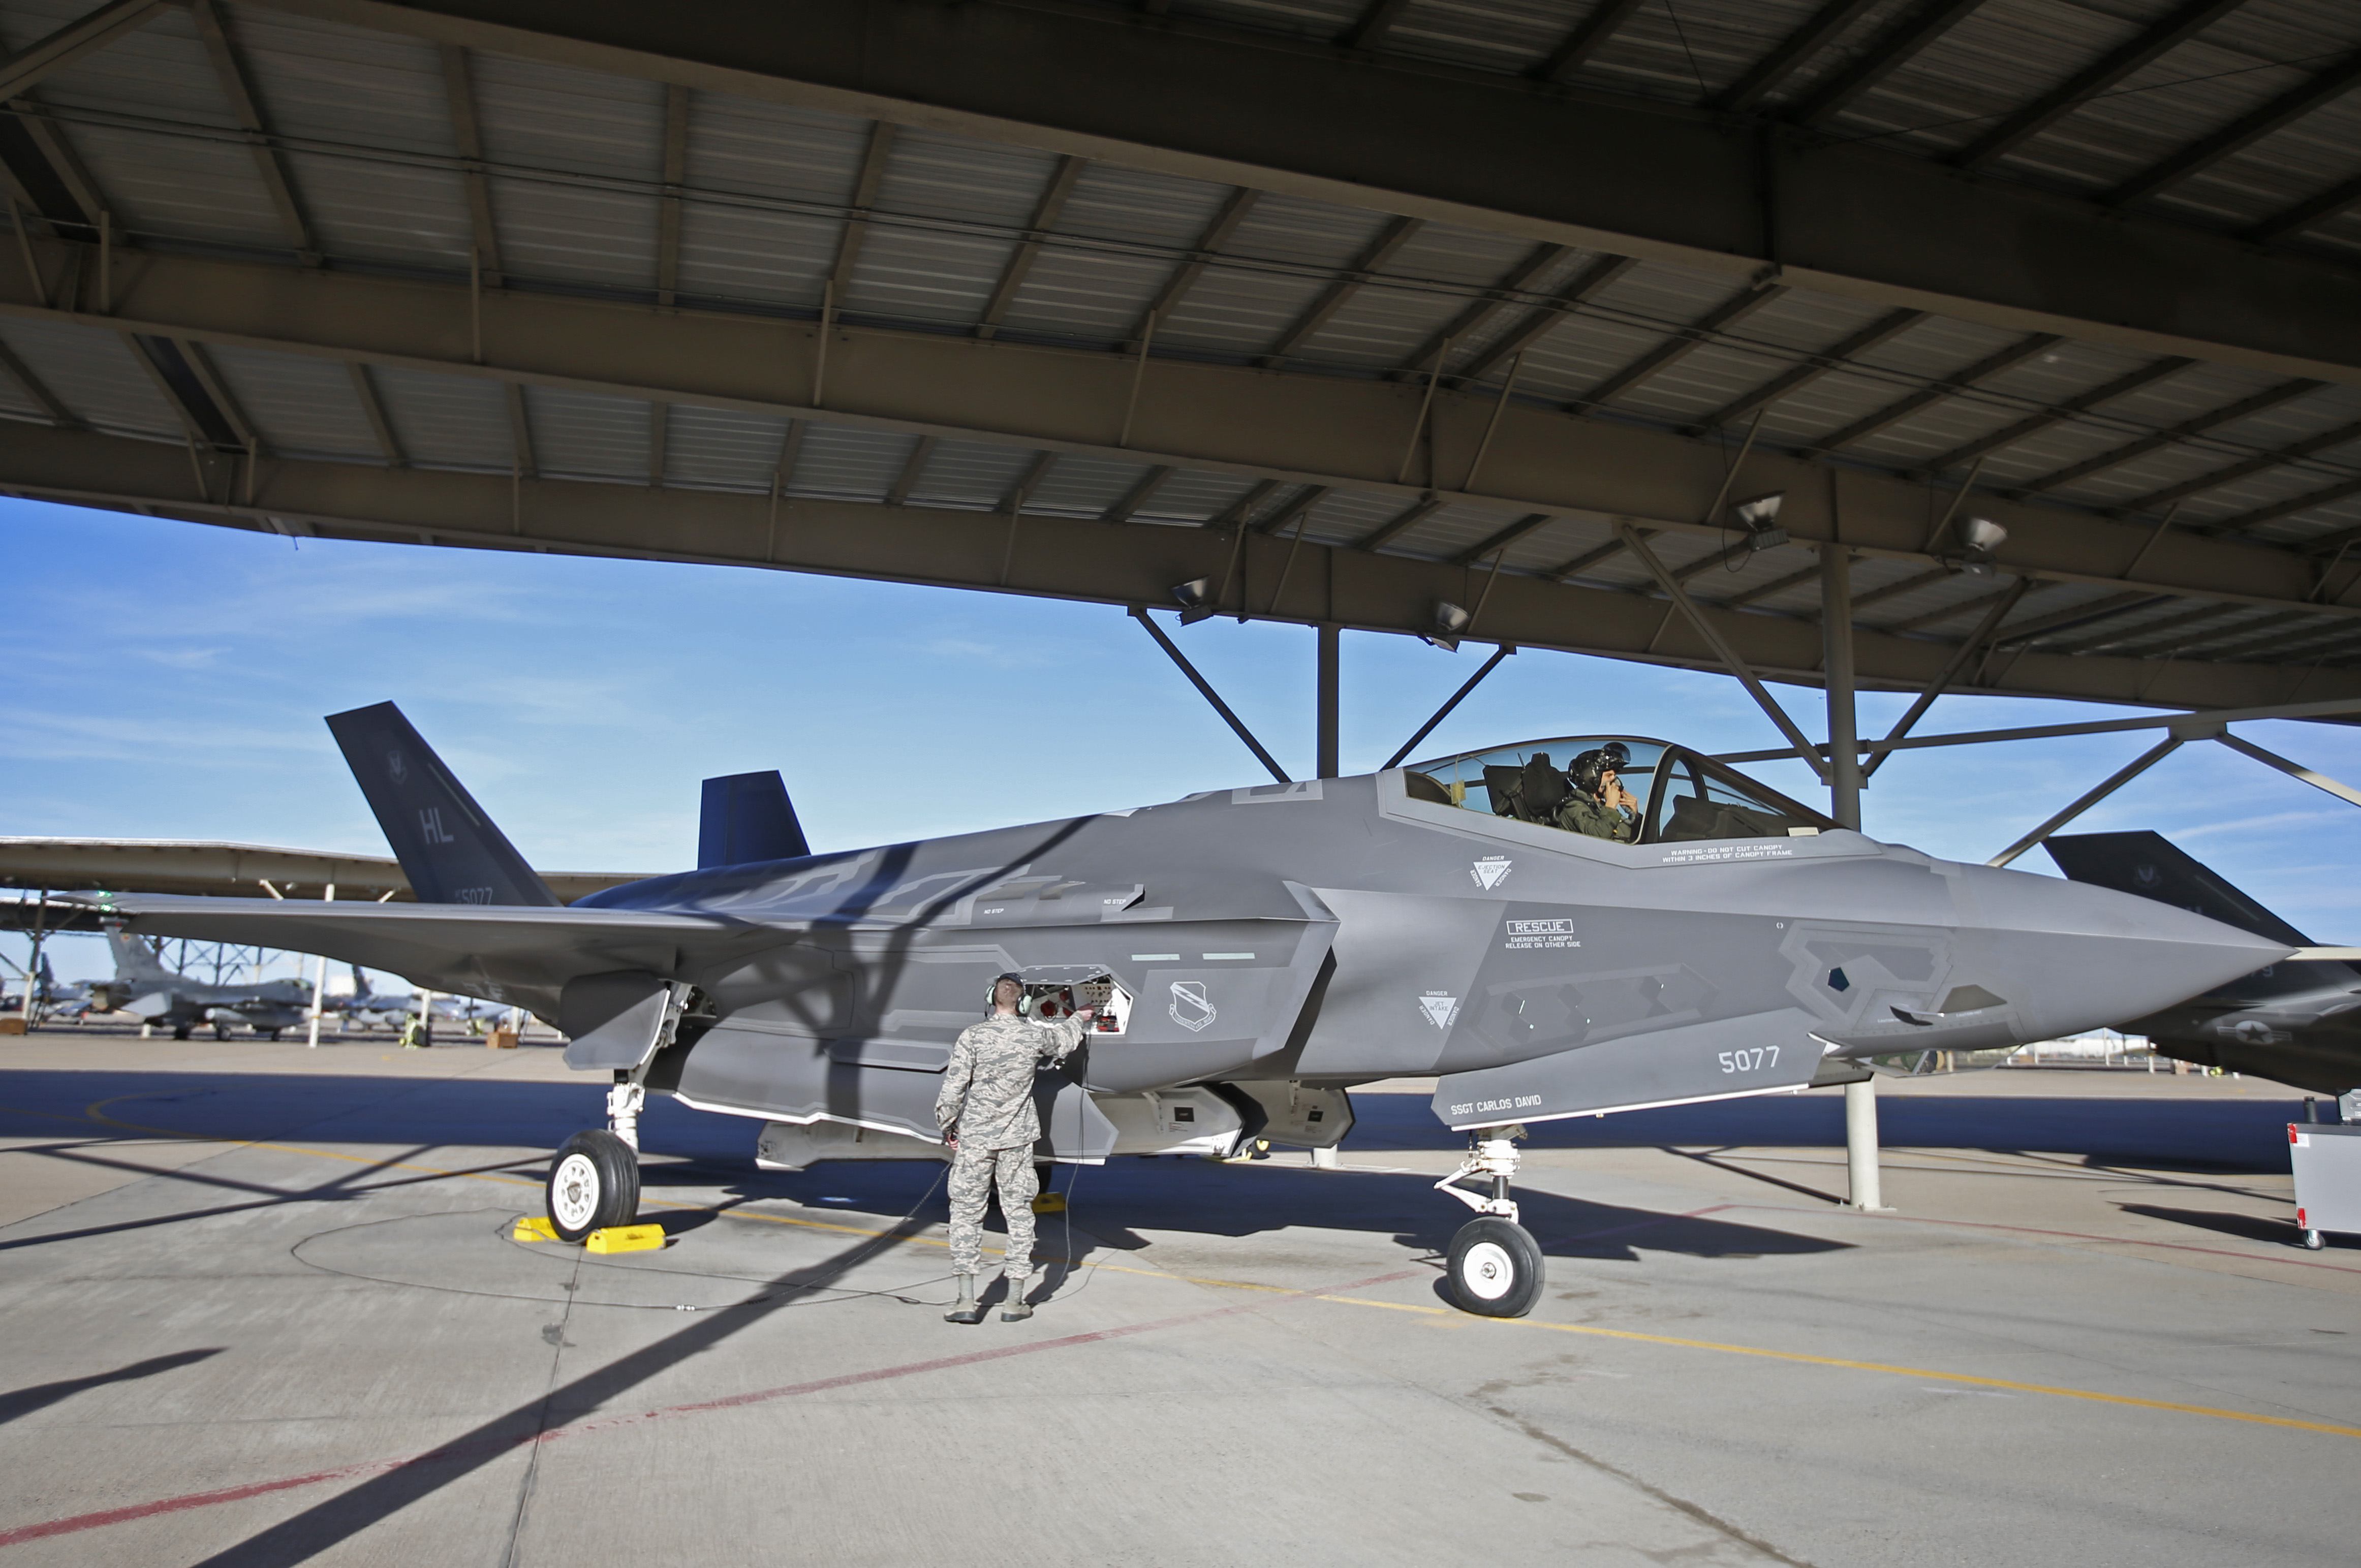 OGDEN, UT - MARCH 15: A ground crew member check out a F-35 plane before a training mission at Hill Air Force Base on March 15, 2017 in Ogden, Utah. Hill is the first Air Force base to get combat ready F-35's. They currently have 17 that might be deployed in the fight against terrorism and ISIS in the near future. (Photo by George Frey/Getty Images)